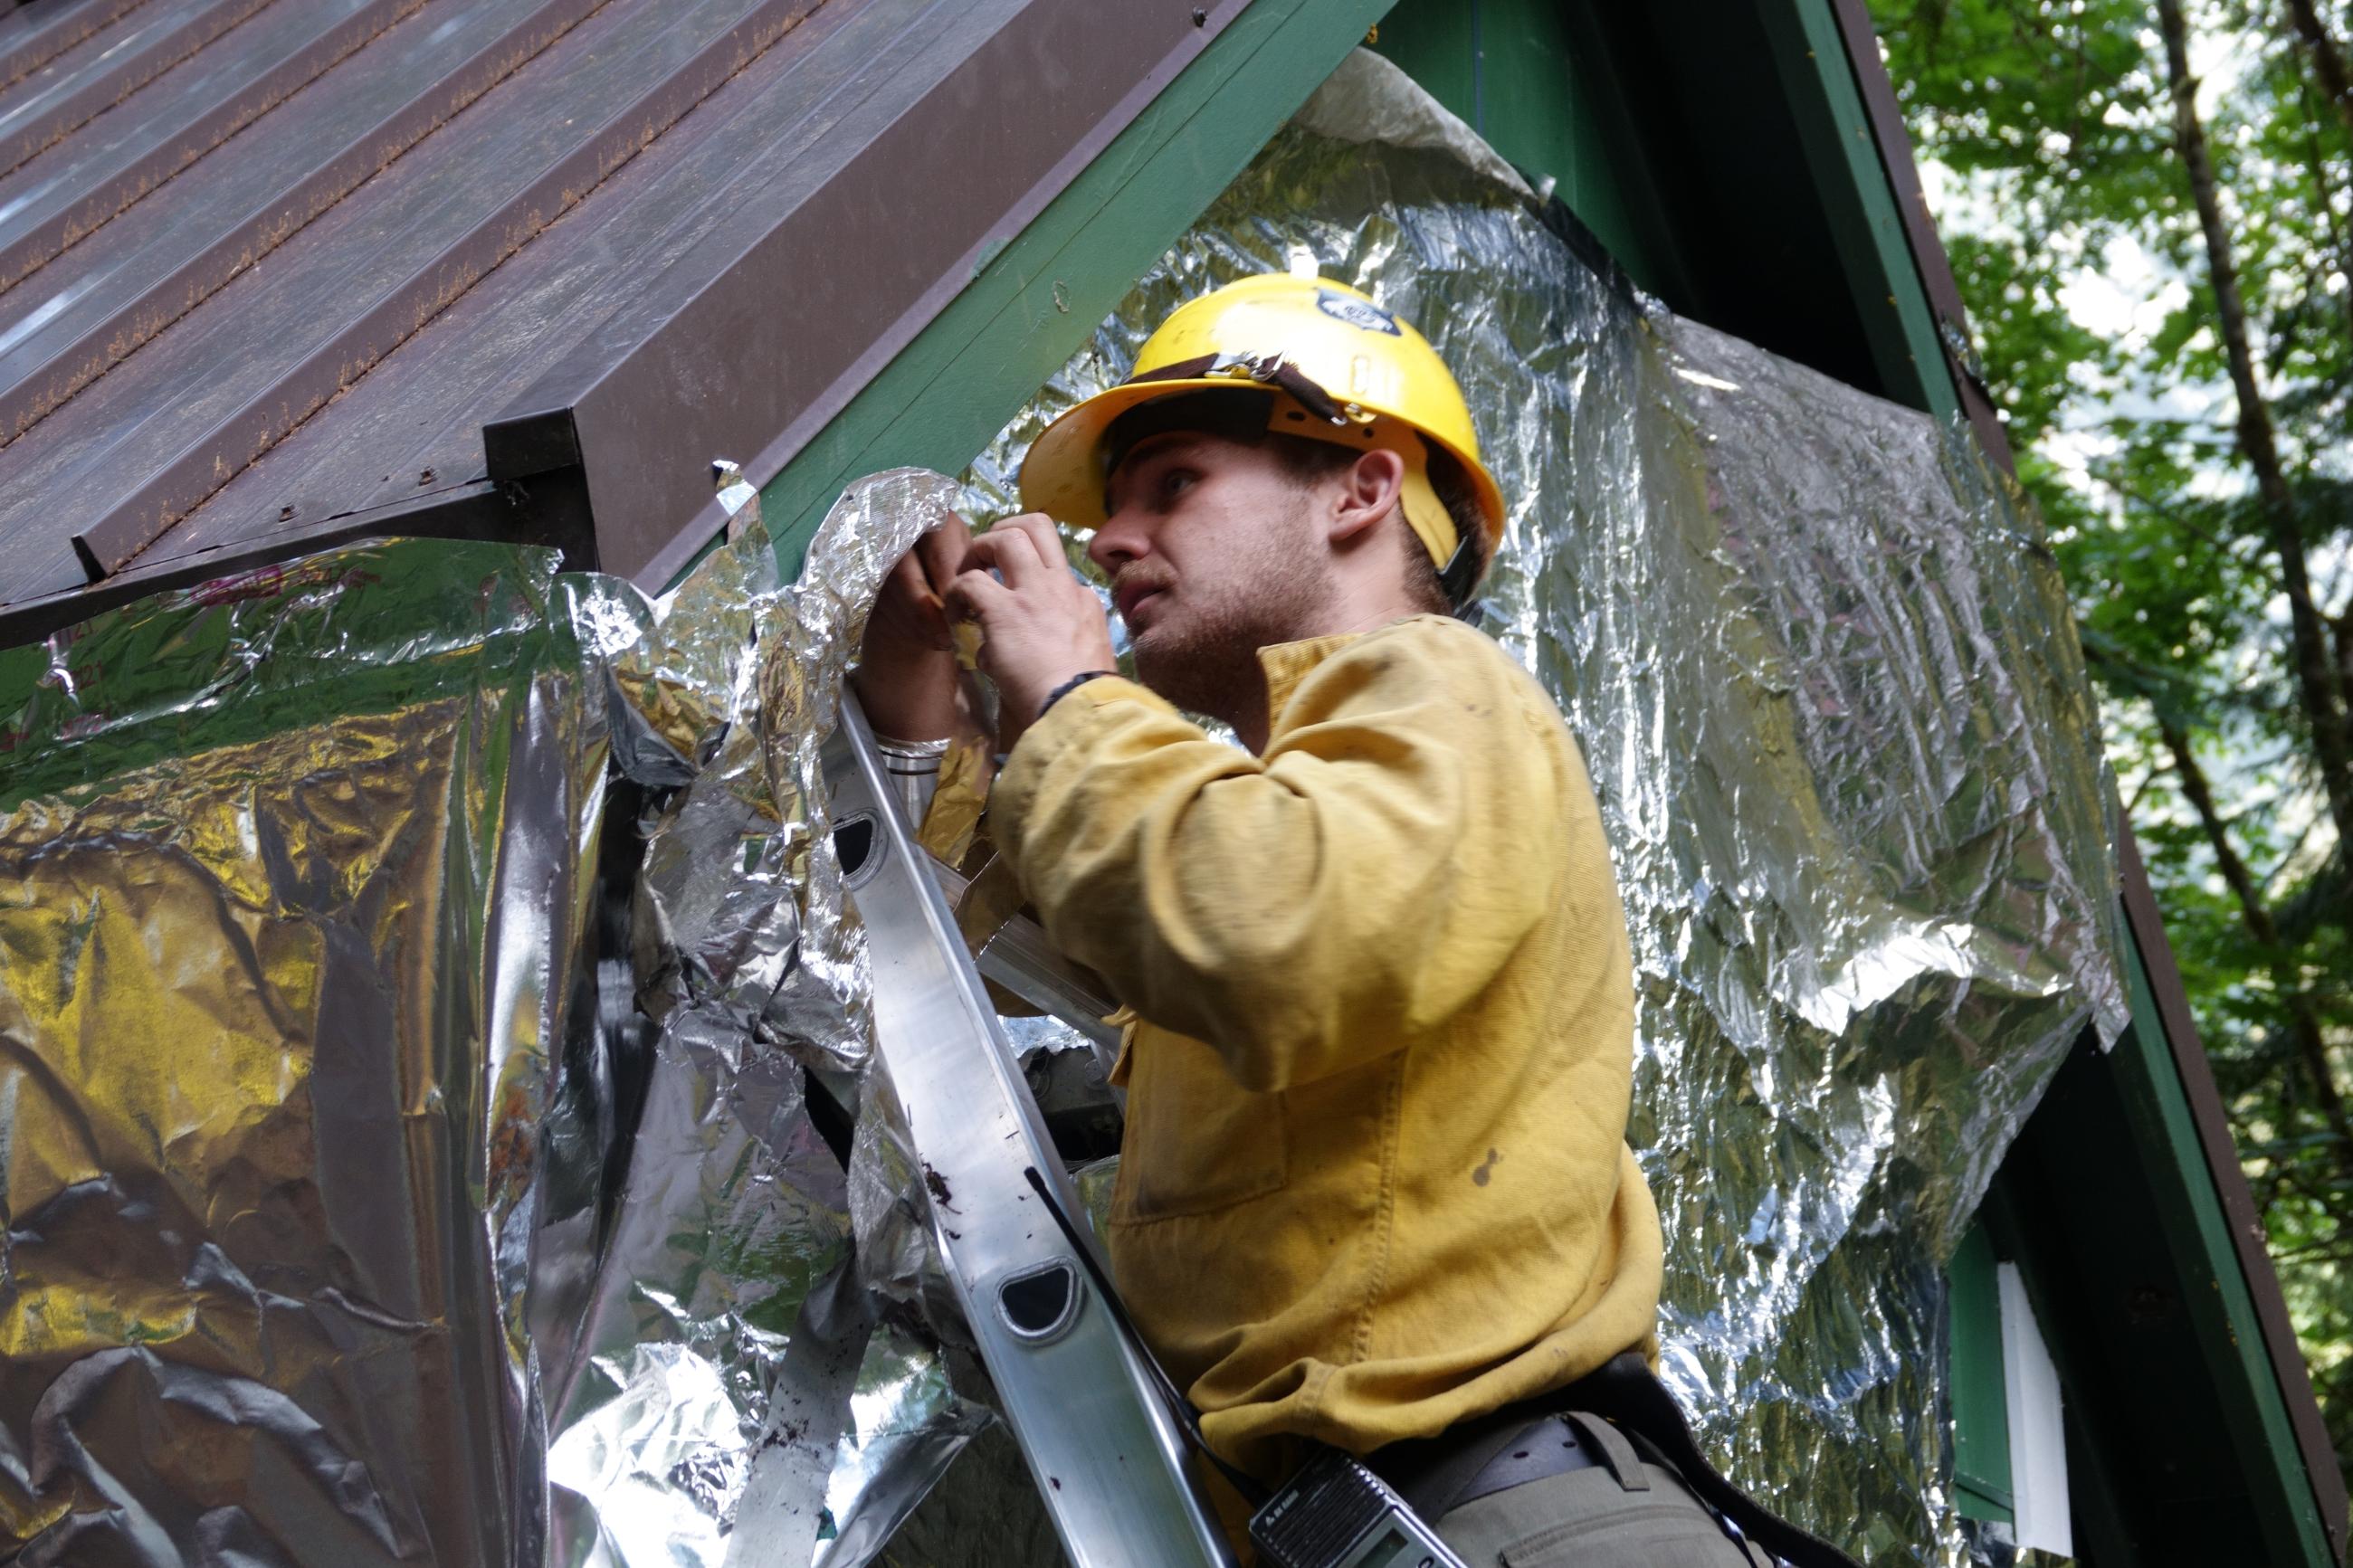 A firefighter wraps a building a silver colored protective covered